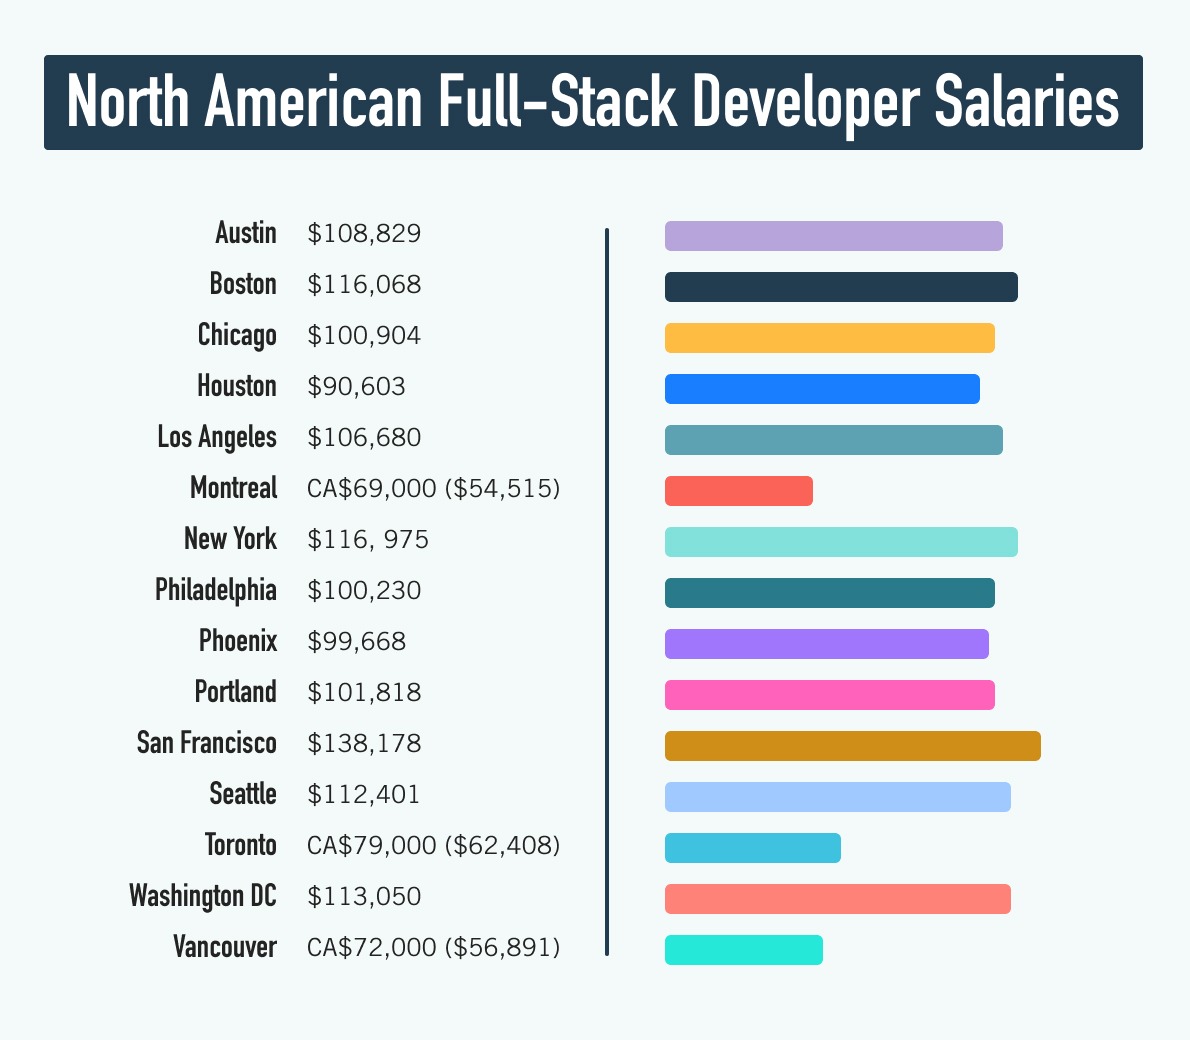 Graphic showing full-stack developer salaries divided by North American city.